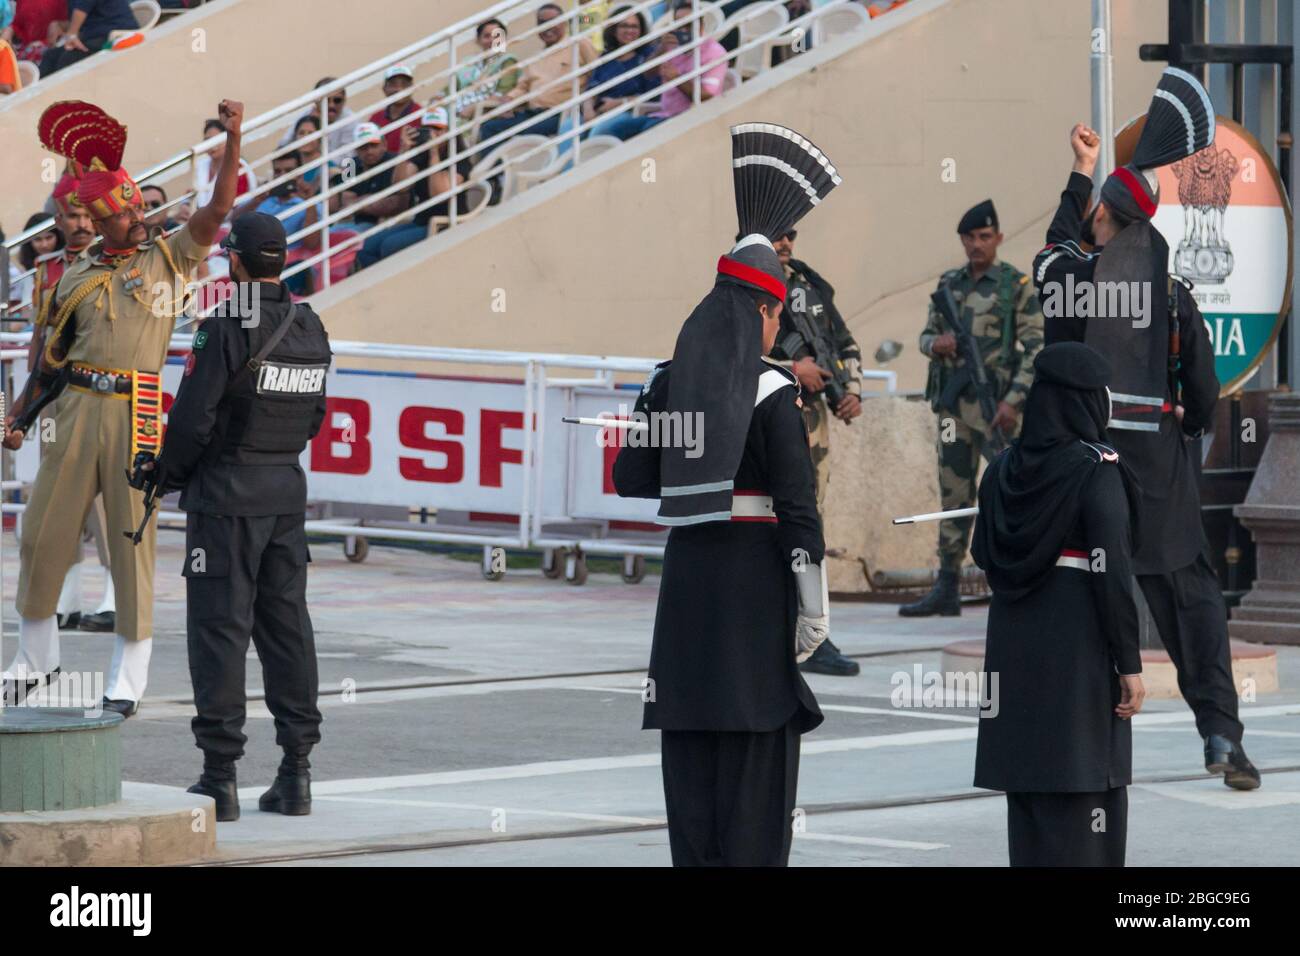 Wagah Border Ceremony on the border between Pakistan and India. Soldiers from both countries engage in a 30 minute military display. Stock Photo